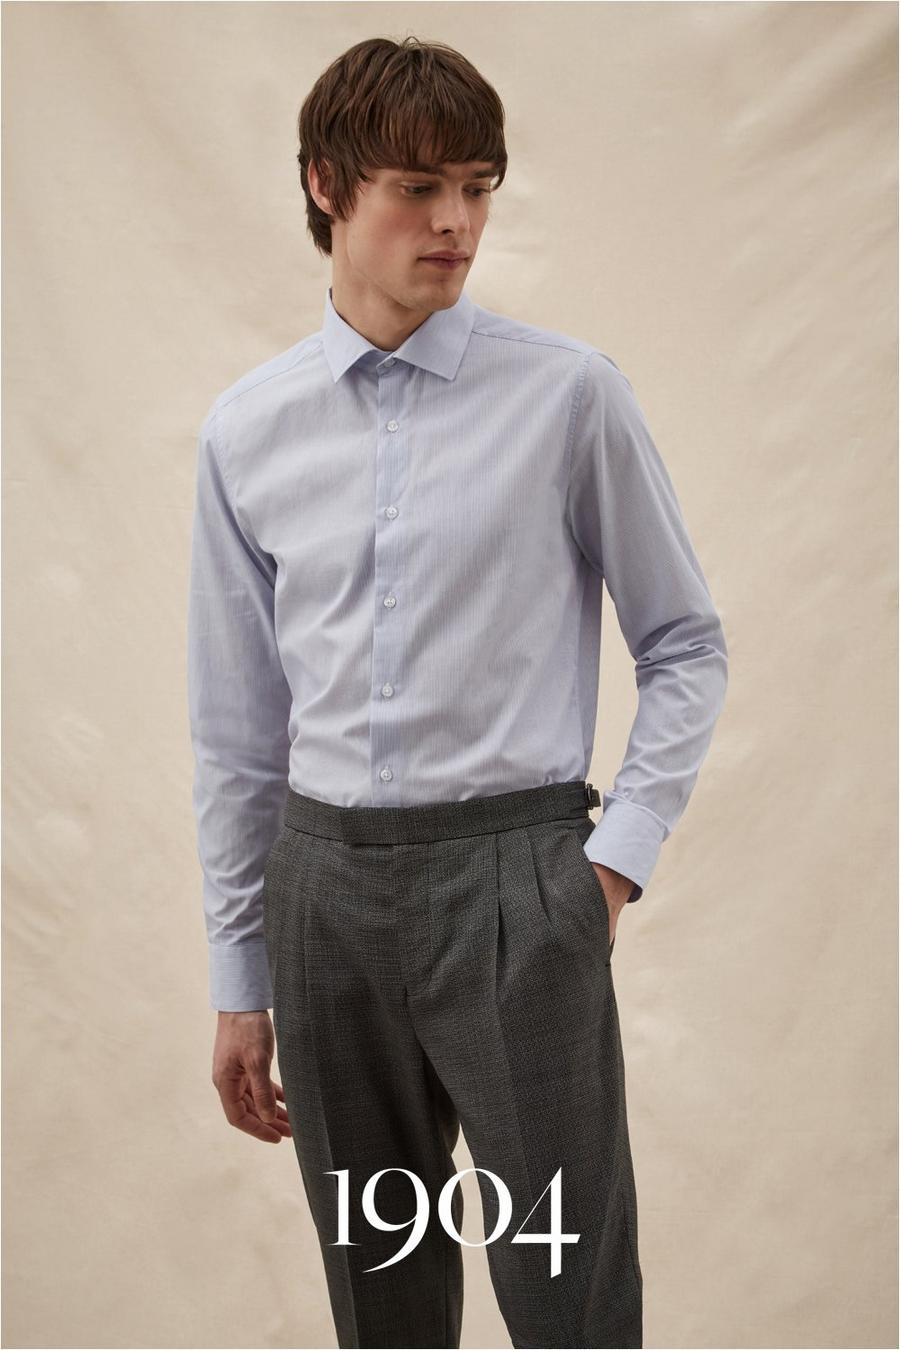 1904 Pinstripe Shirt With Spread Collar